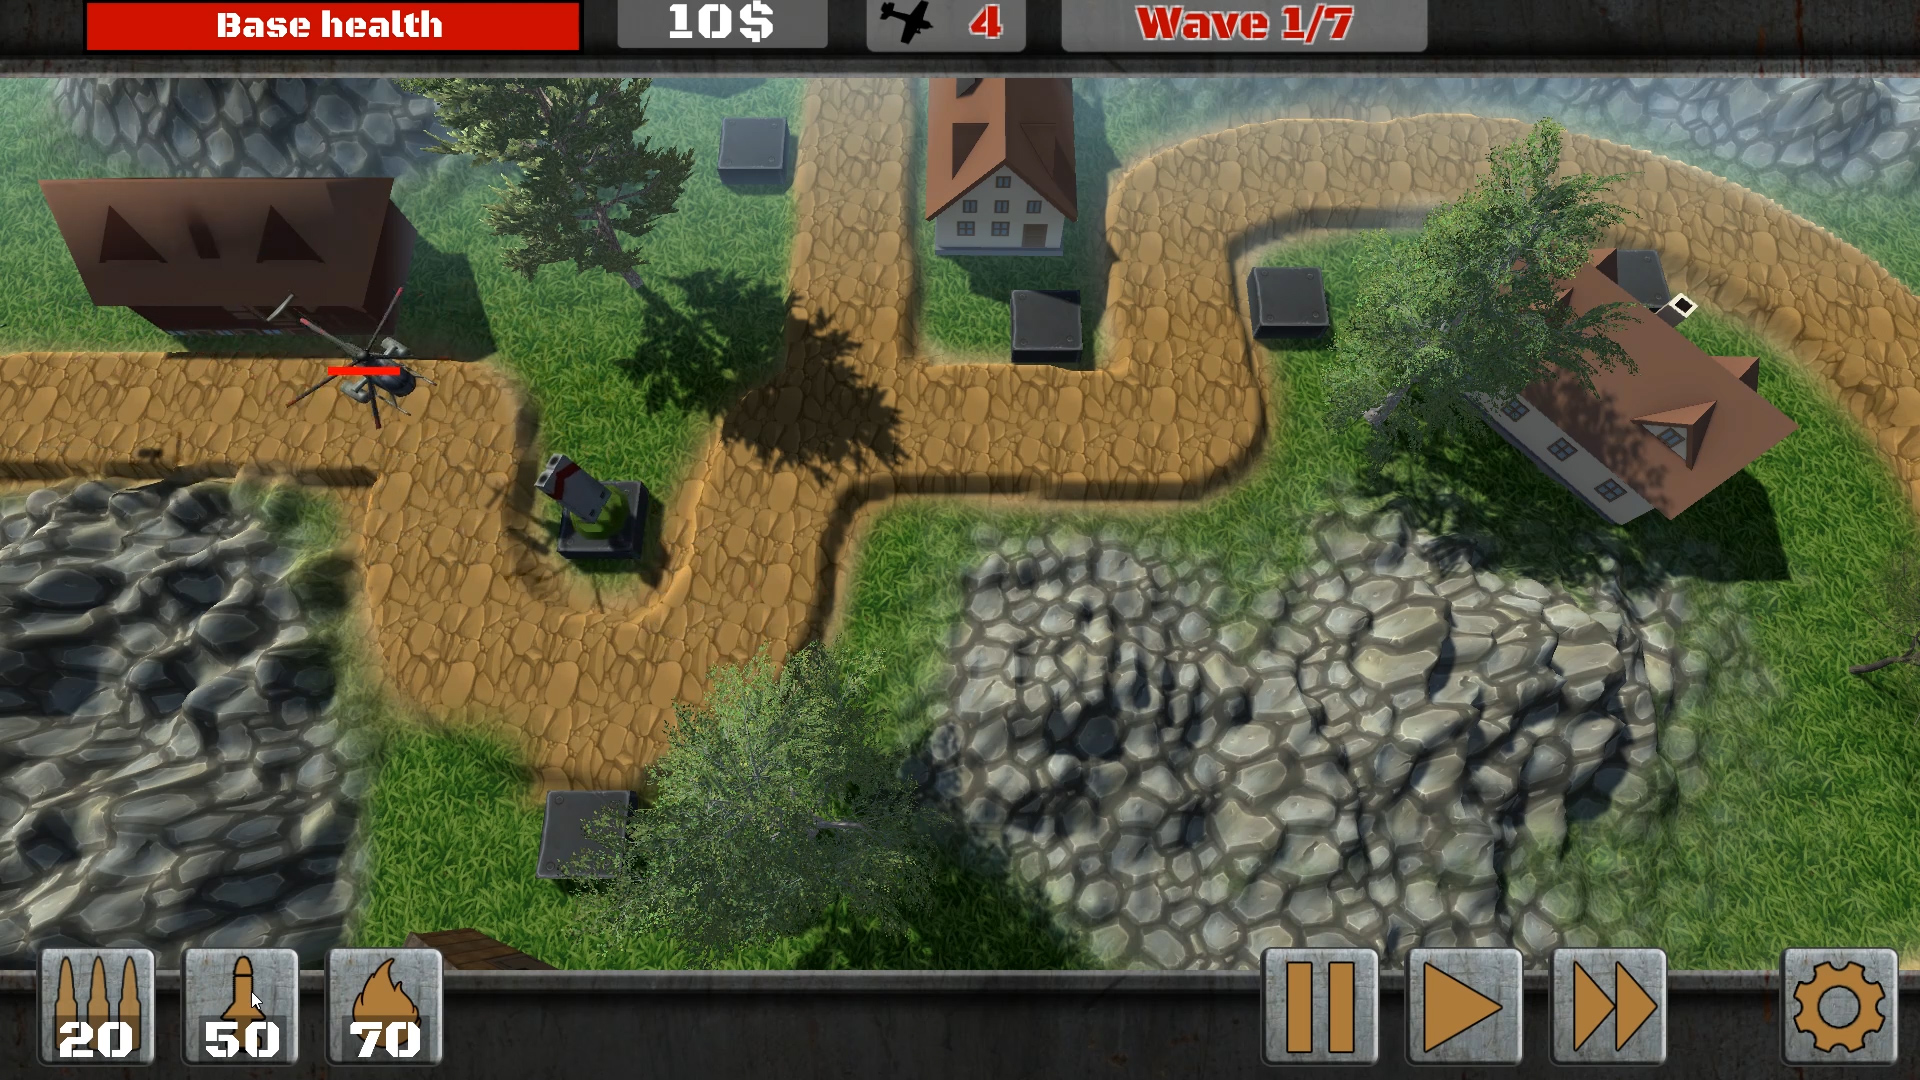 The game playing screen shot of the Sudden Attack game